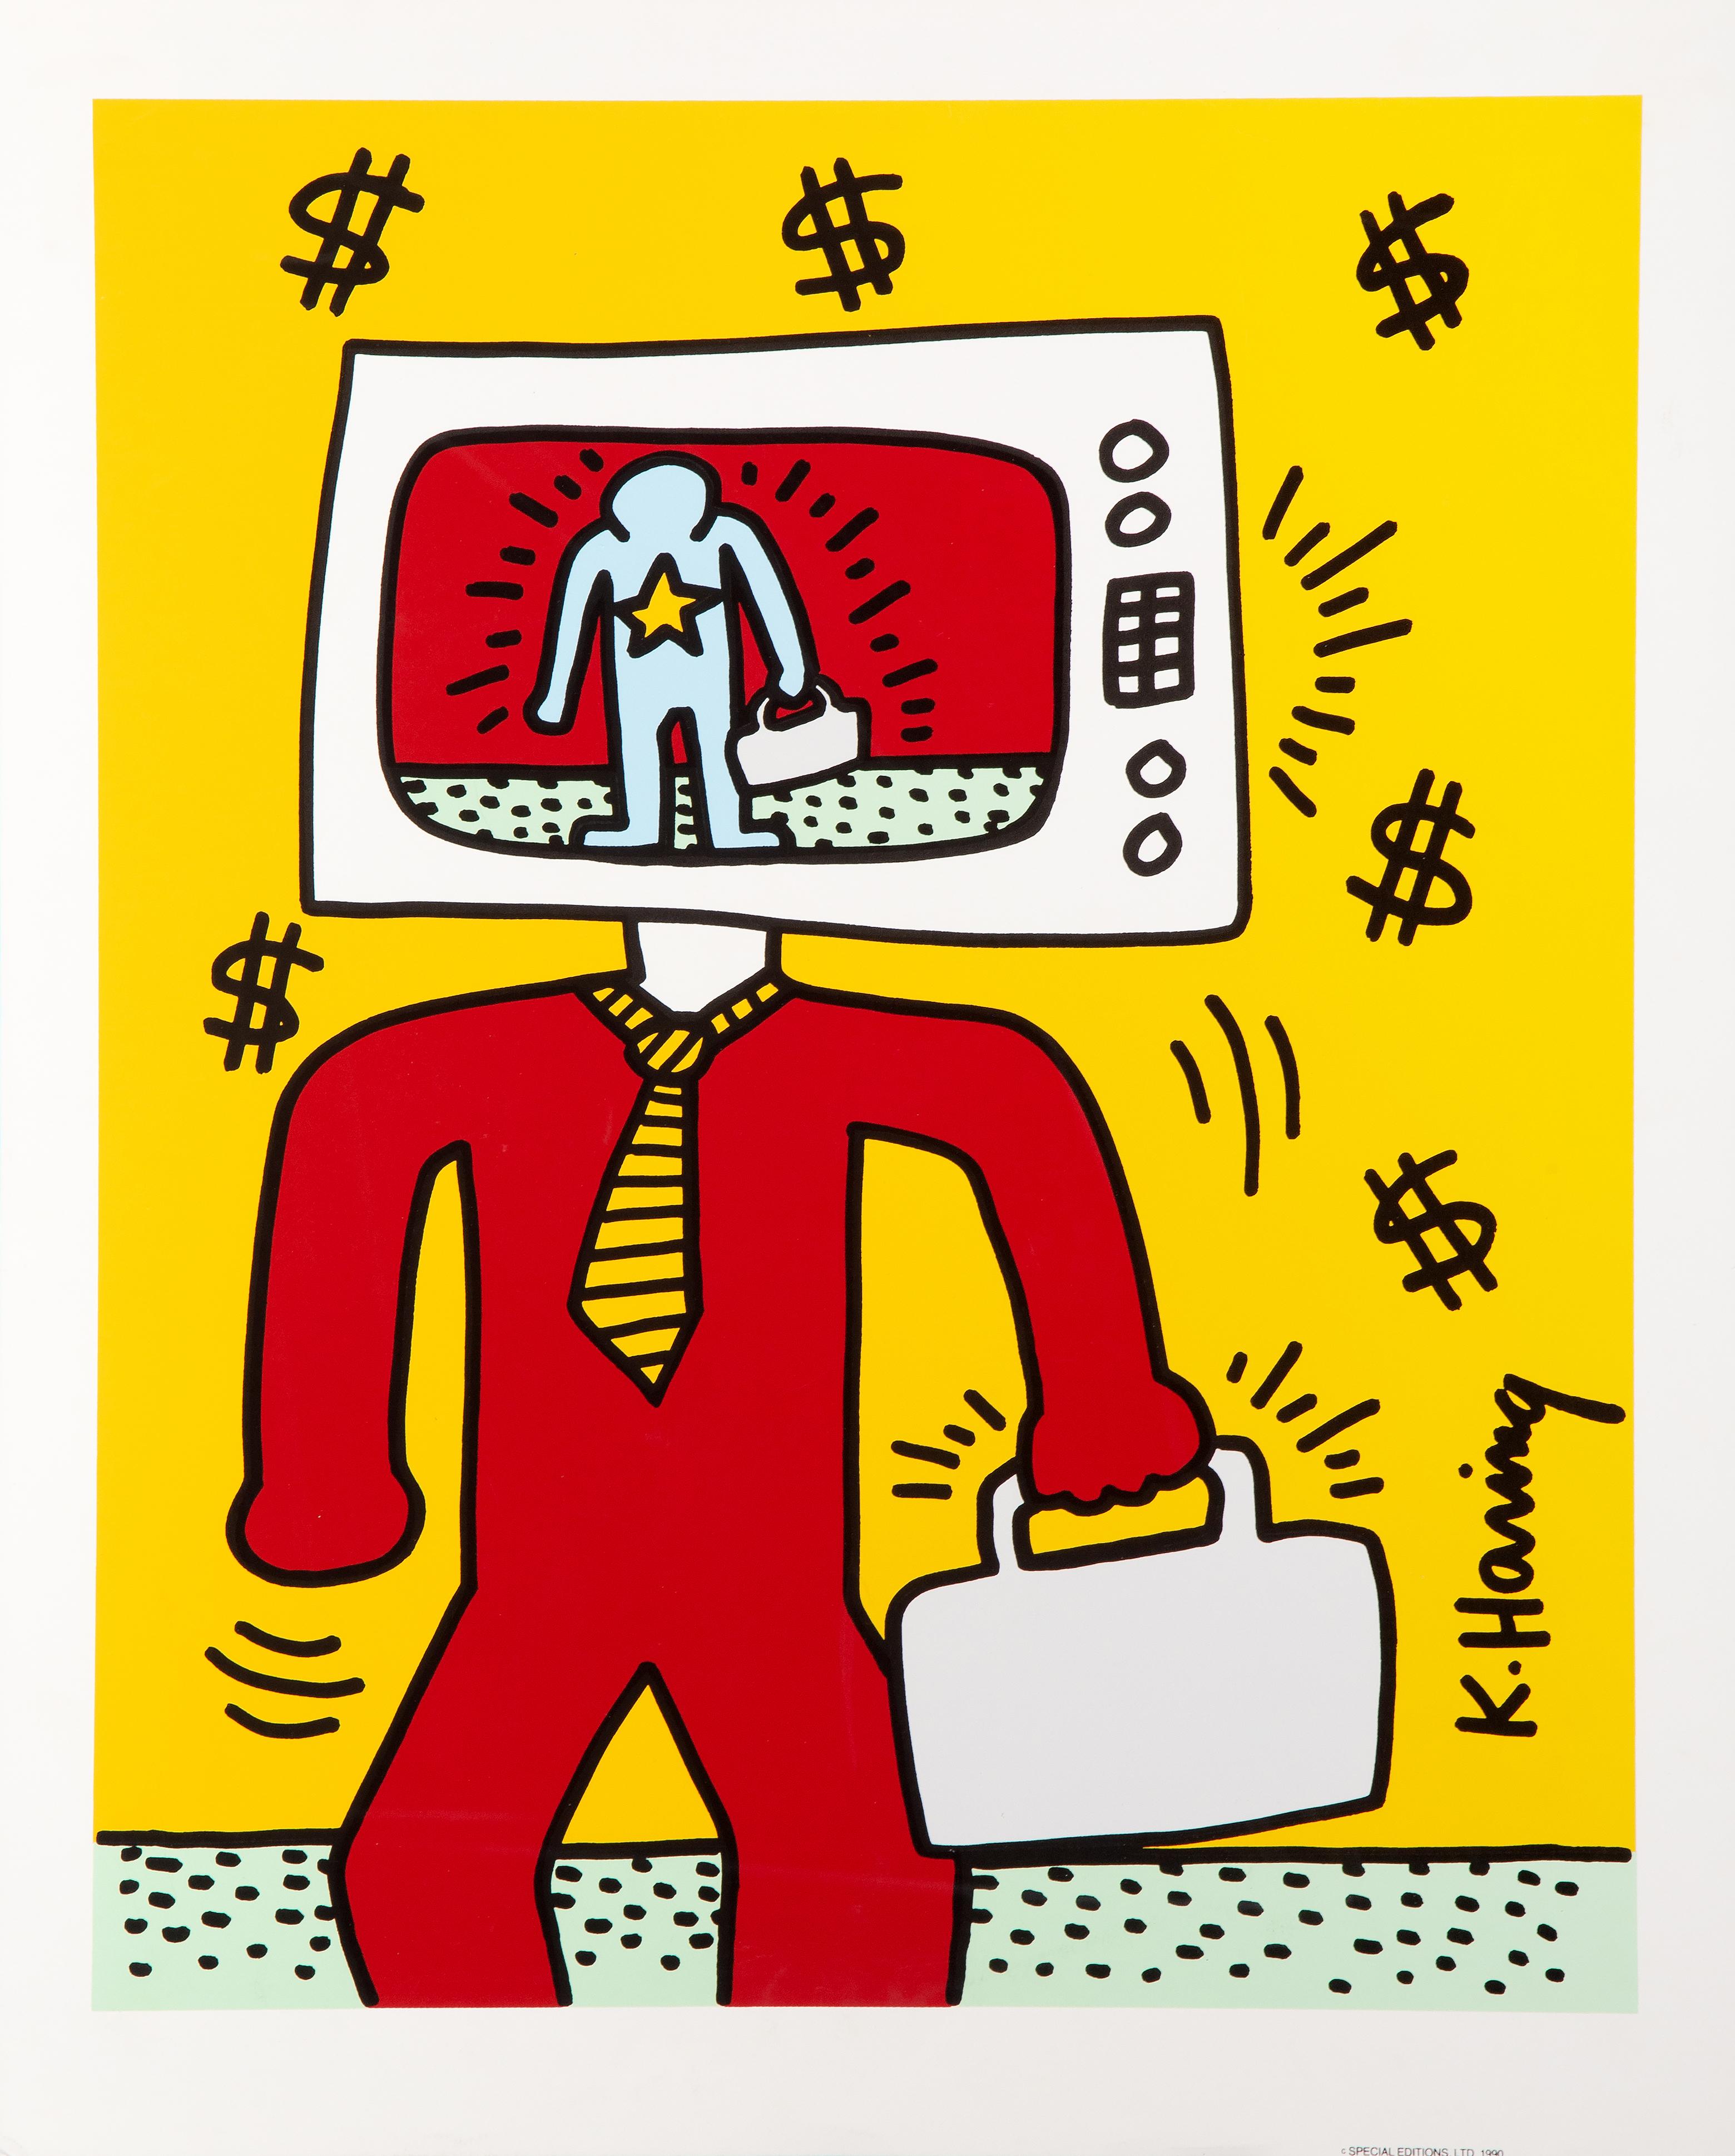 A limited edition silkscreen poster Keith Haring designed for Playboy. This limited edition run of 1000 was published in 1990 by Special Editions Ltd. The signature and date 'K. Haring' is in the printing. The sheet size is 32.25 x 26 inches and the